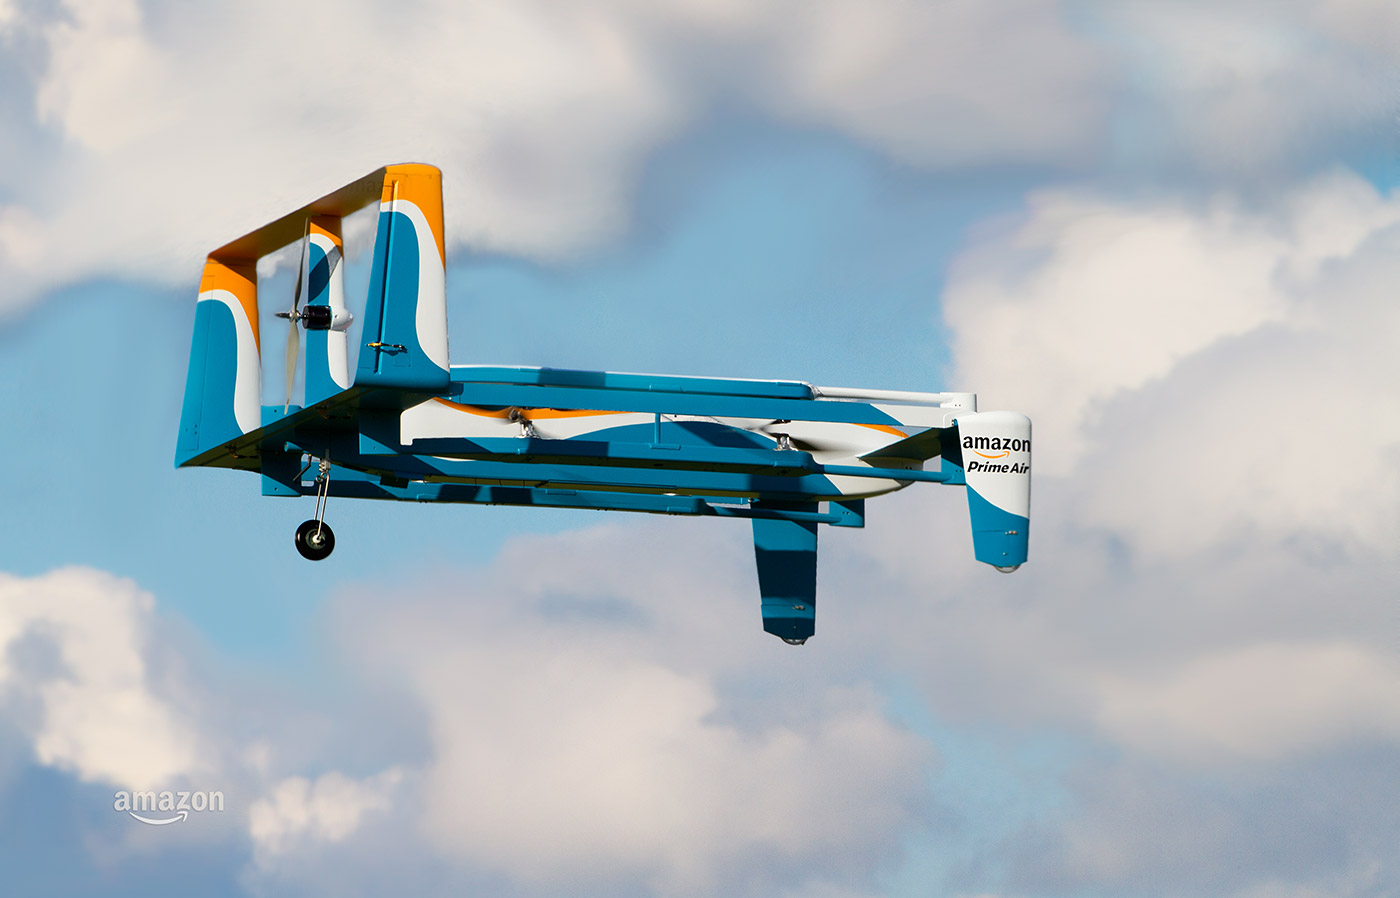 Amazon exec explains how Prime Air delivery drones will work